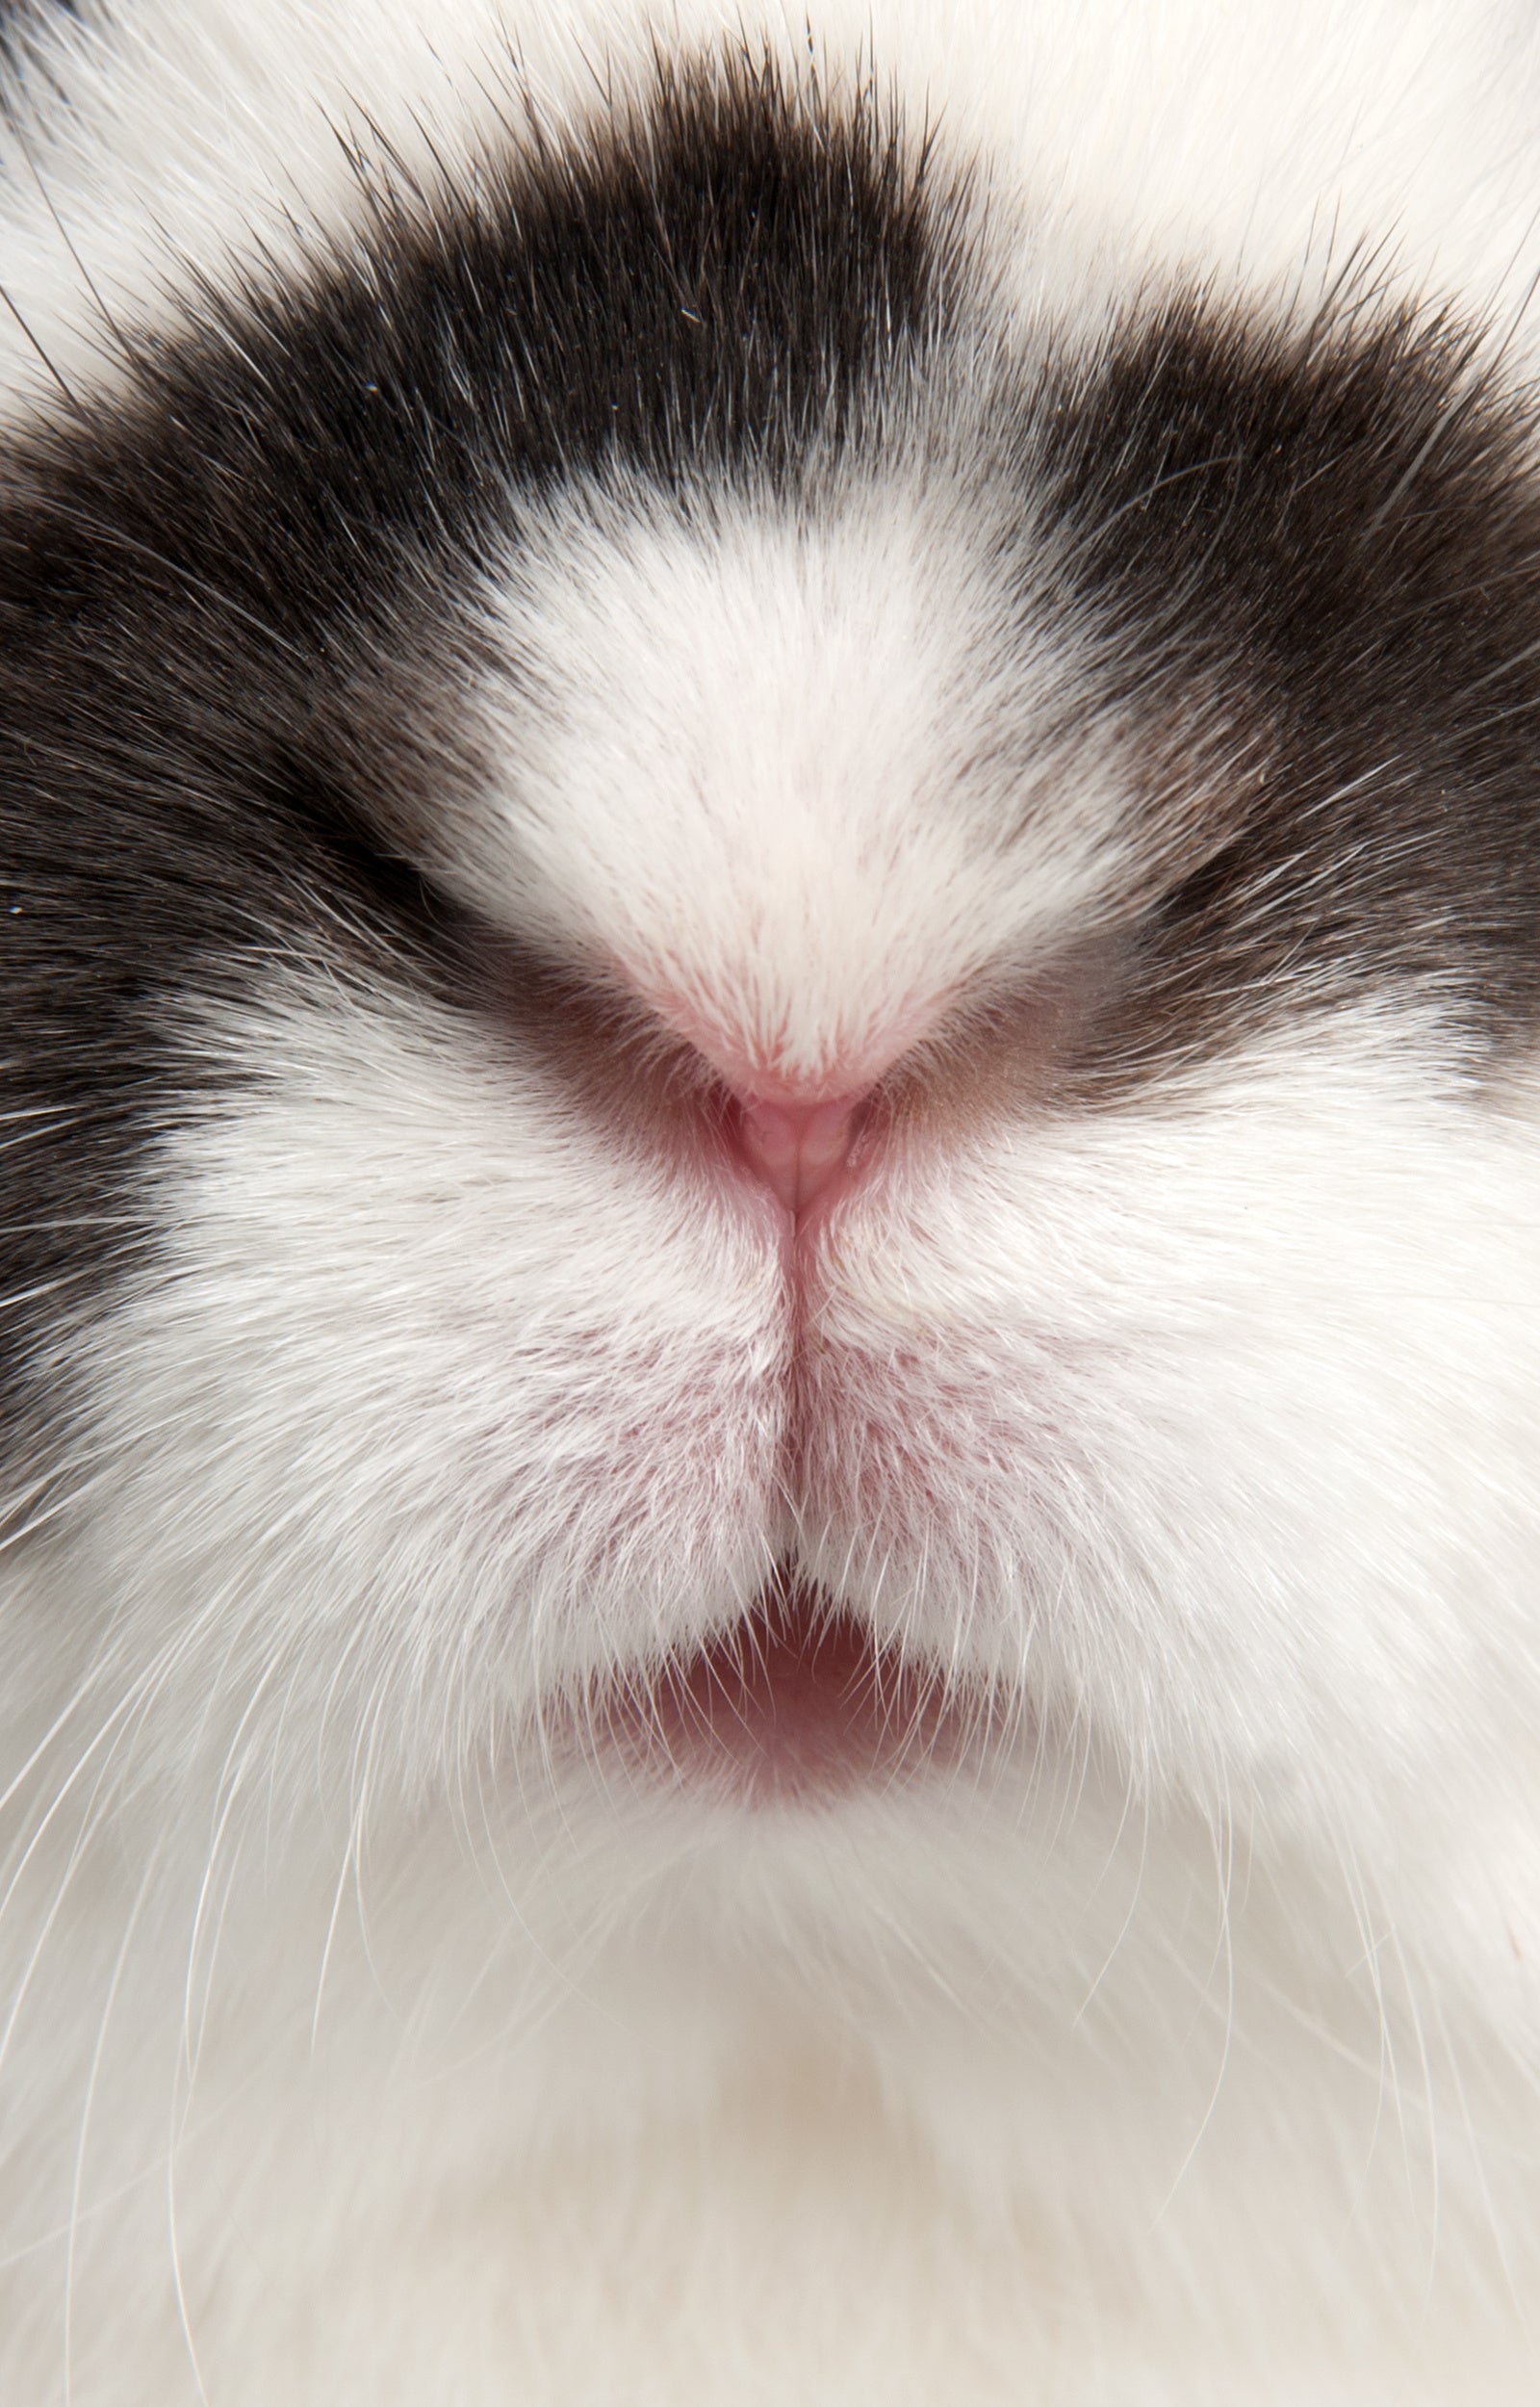 Close-up macro photo of baby bunny nose and mouth